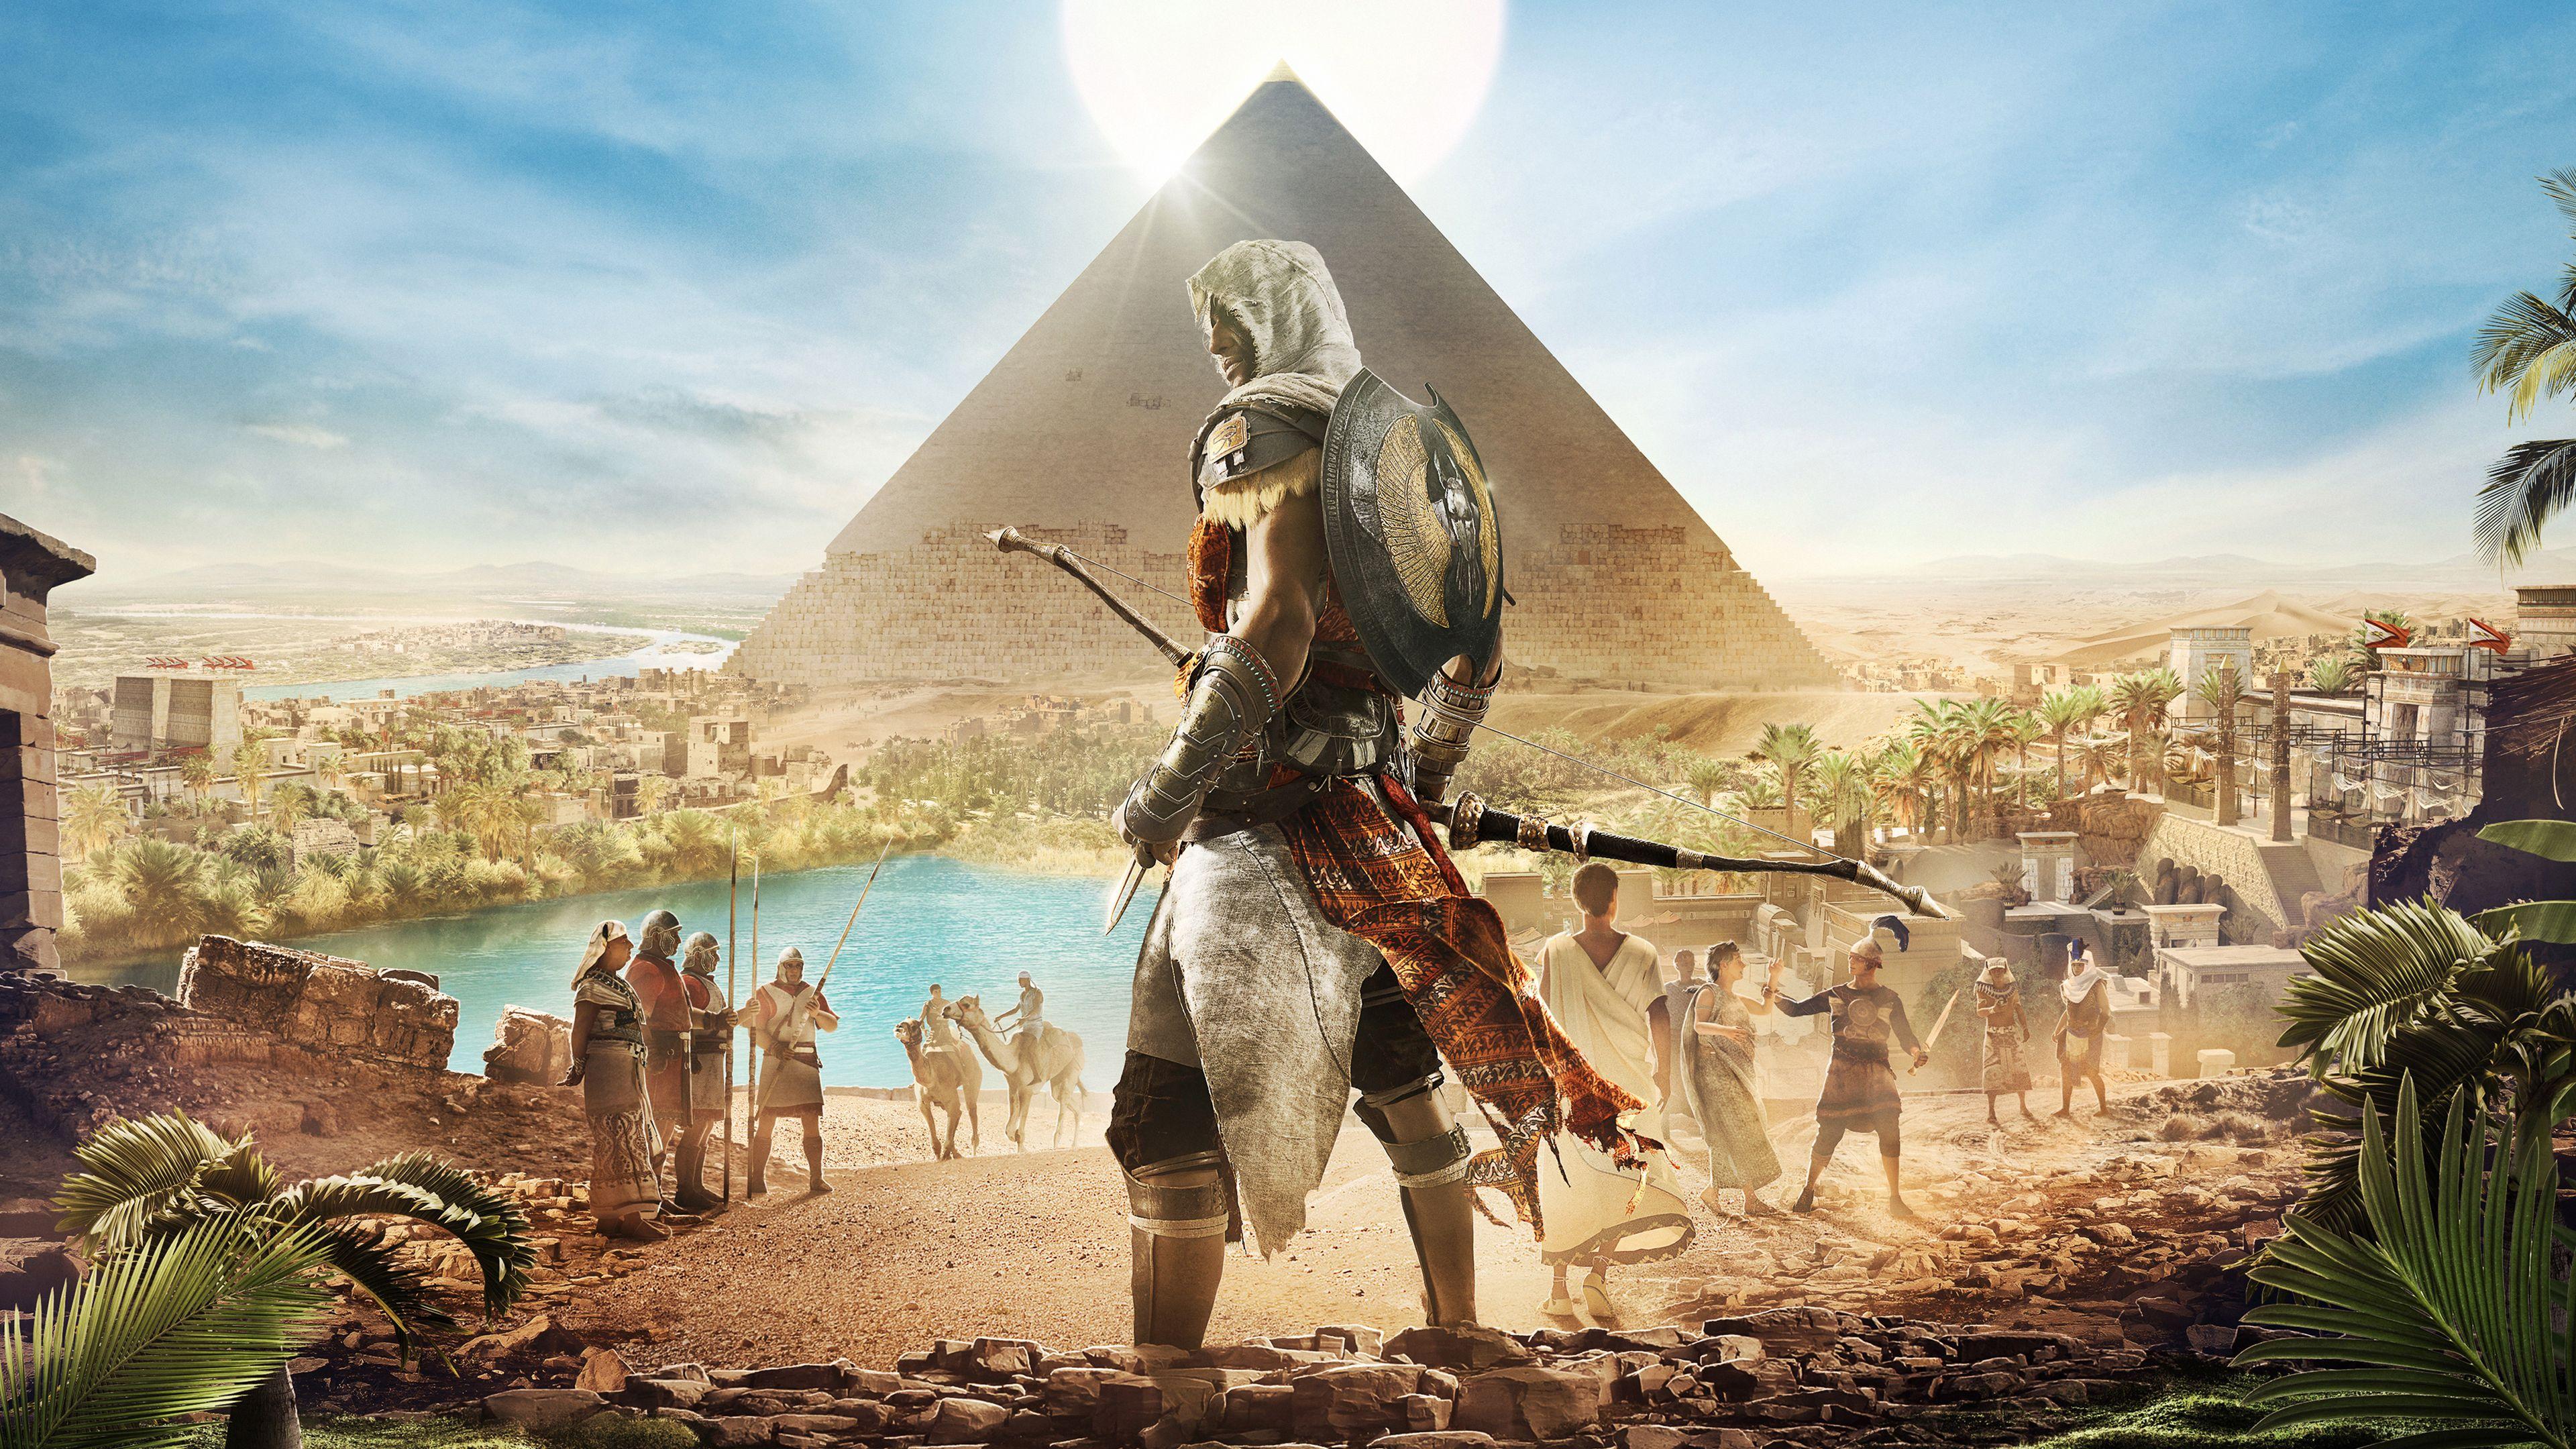 Assassin S Creed K Wallpapers Top Free Assassin S Creed K